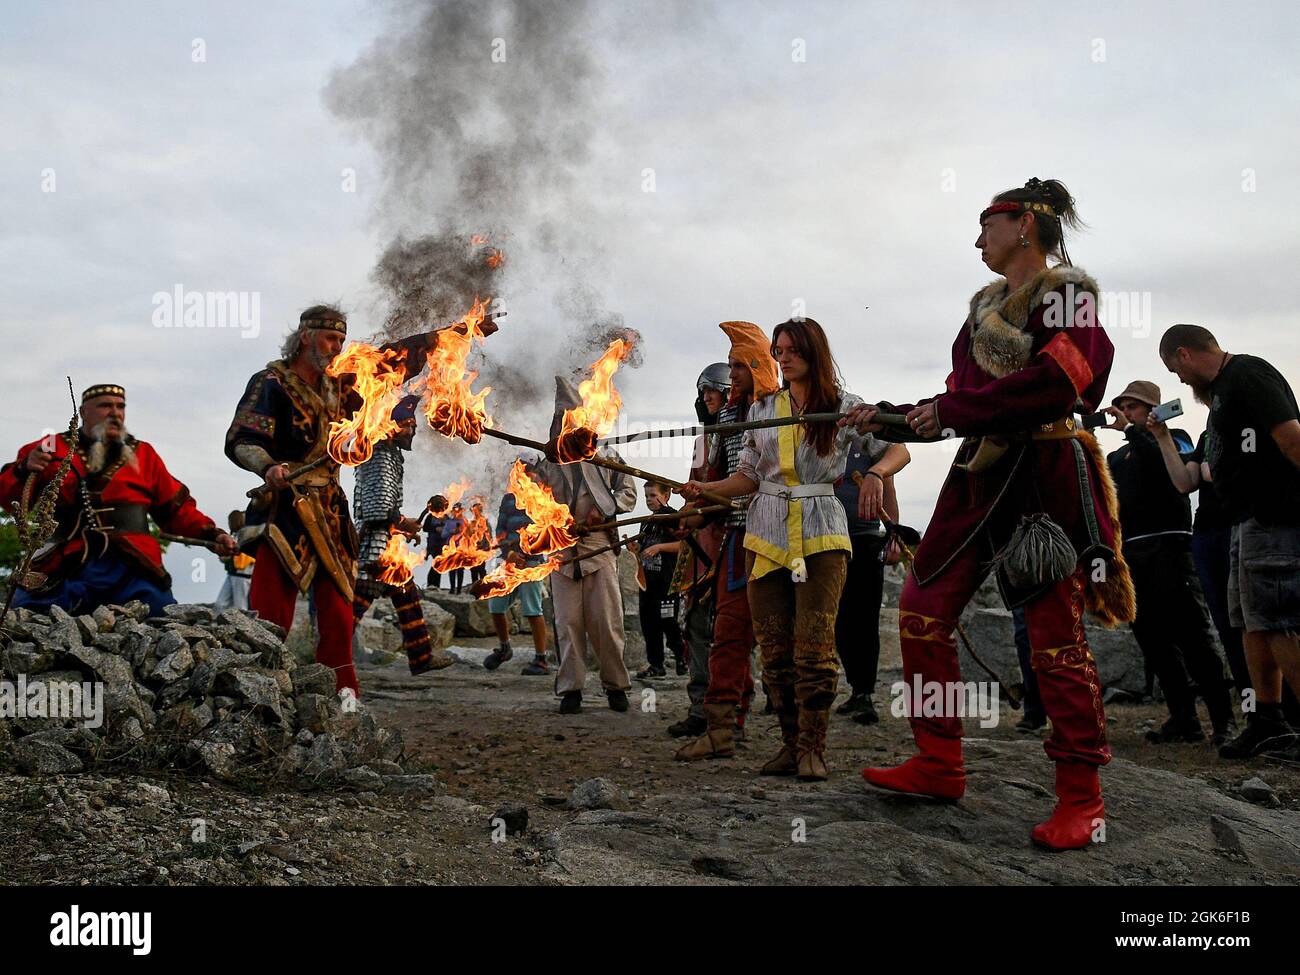 ZAPORIZHZHIA REGION, UKRAINE - SEPTEMBER 11, 2021 - History enthusiasts in period costumes hold burning torches during the Legends of Steppe 2021 Open Stock Photo